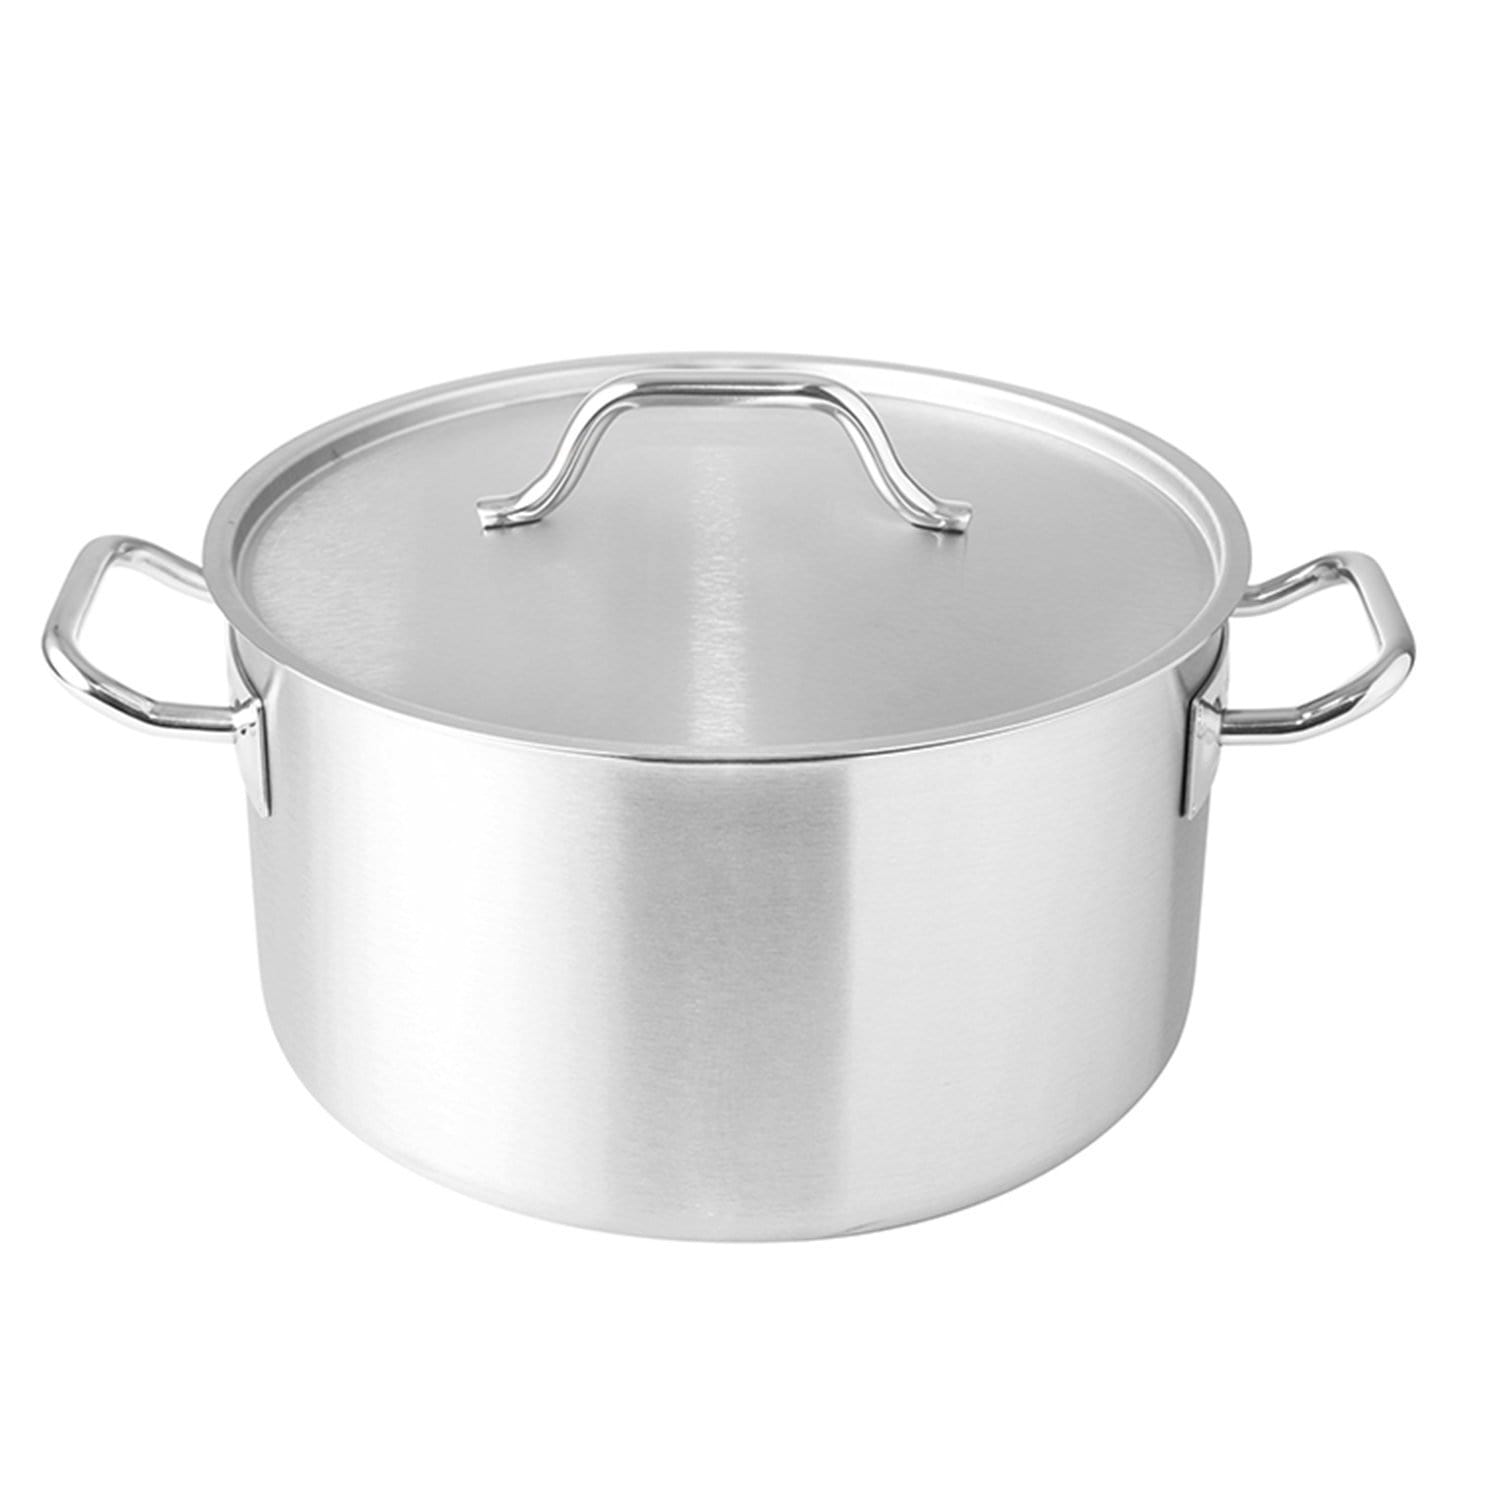 Silampos Deep Casserole with Lid - Silver, 28 cm - 638121BB2928 - Jashanmal Home